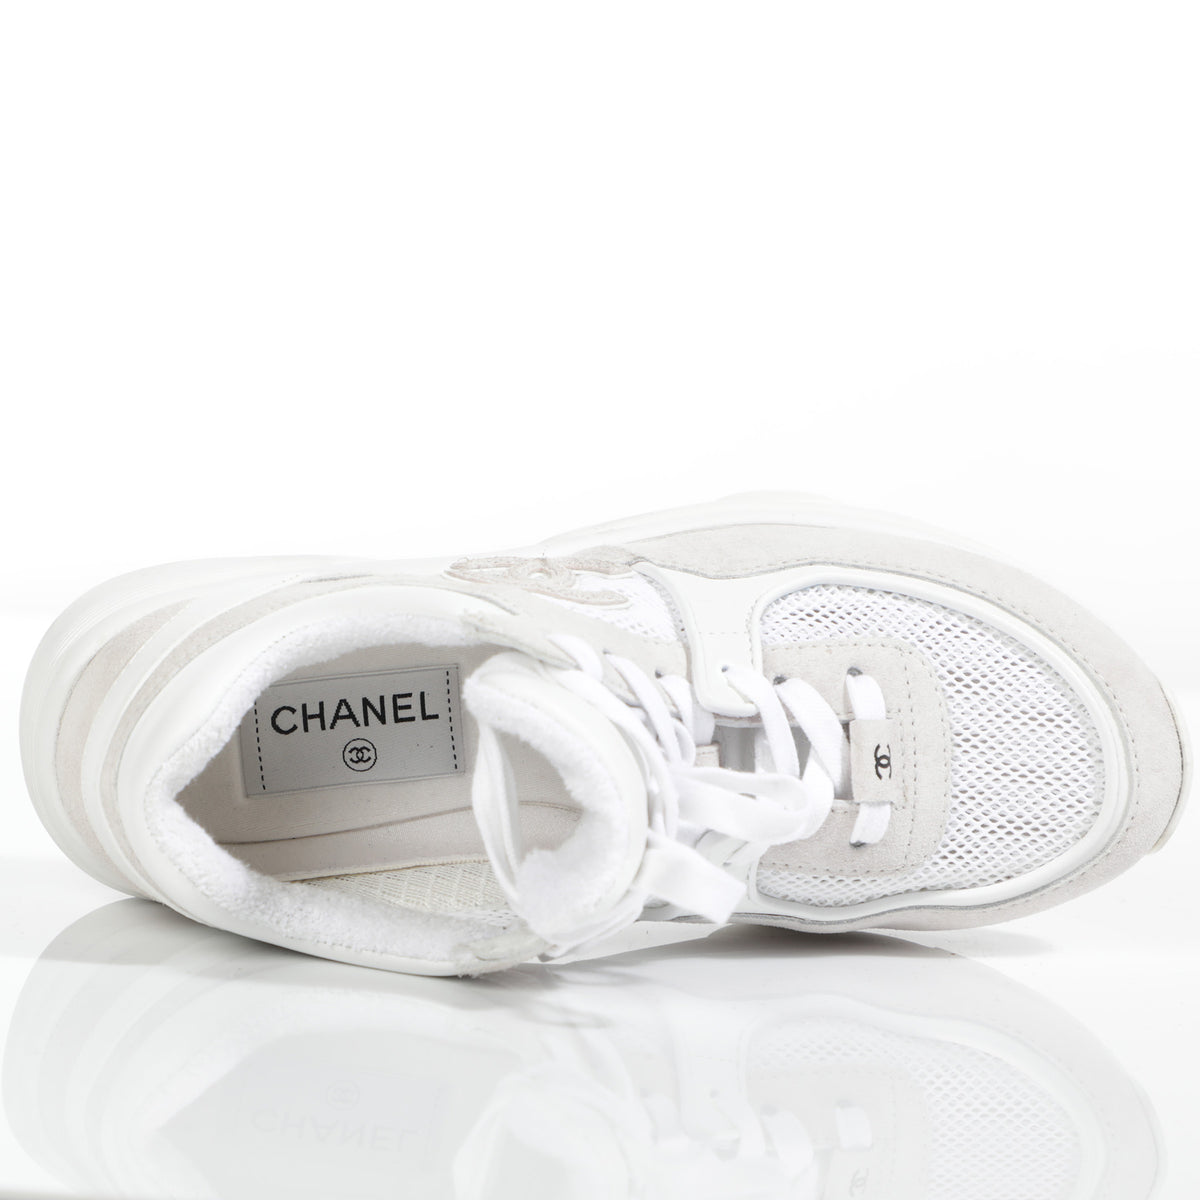 Chanel Spring/Summer 2019 Cloud White Suede Leather Trainer Sneakers Size 6.5